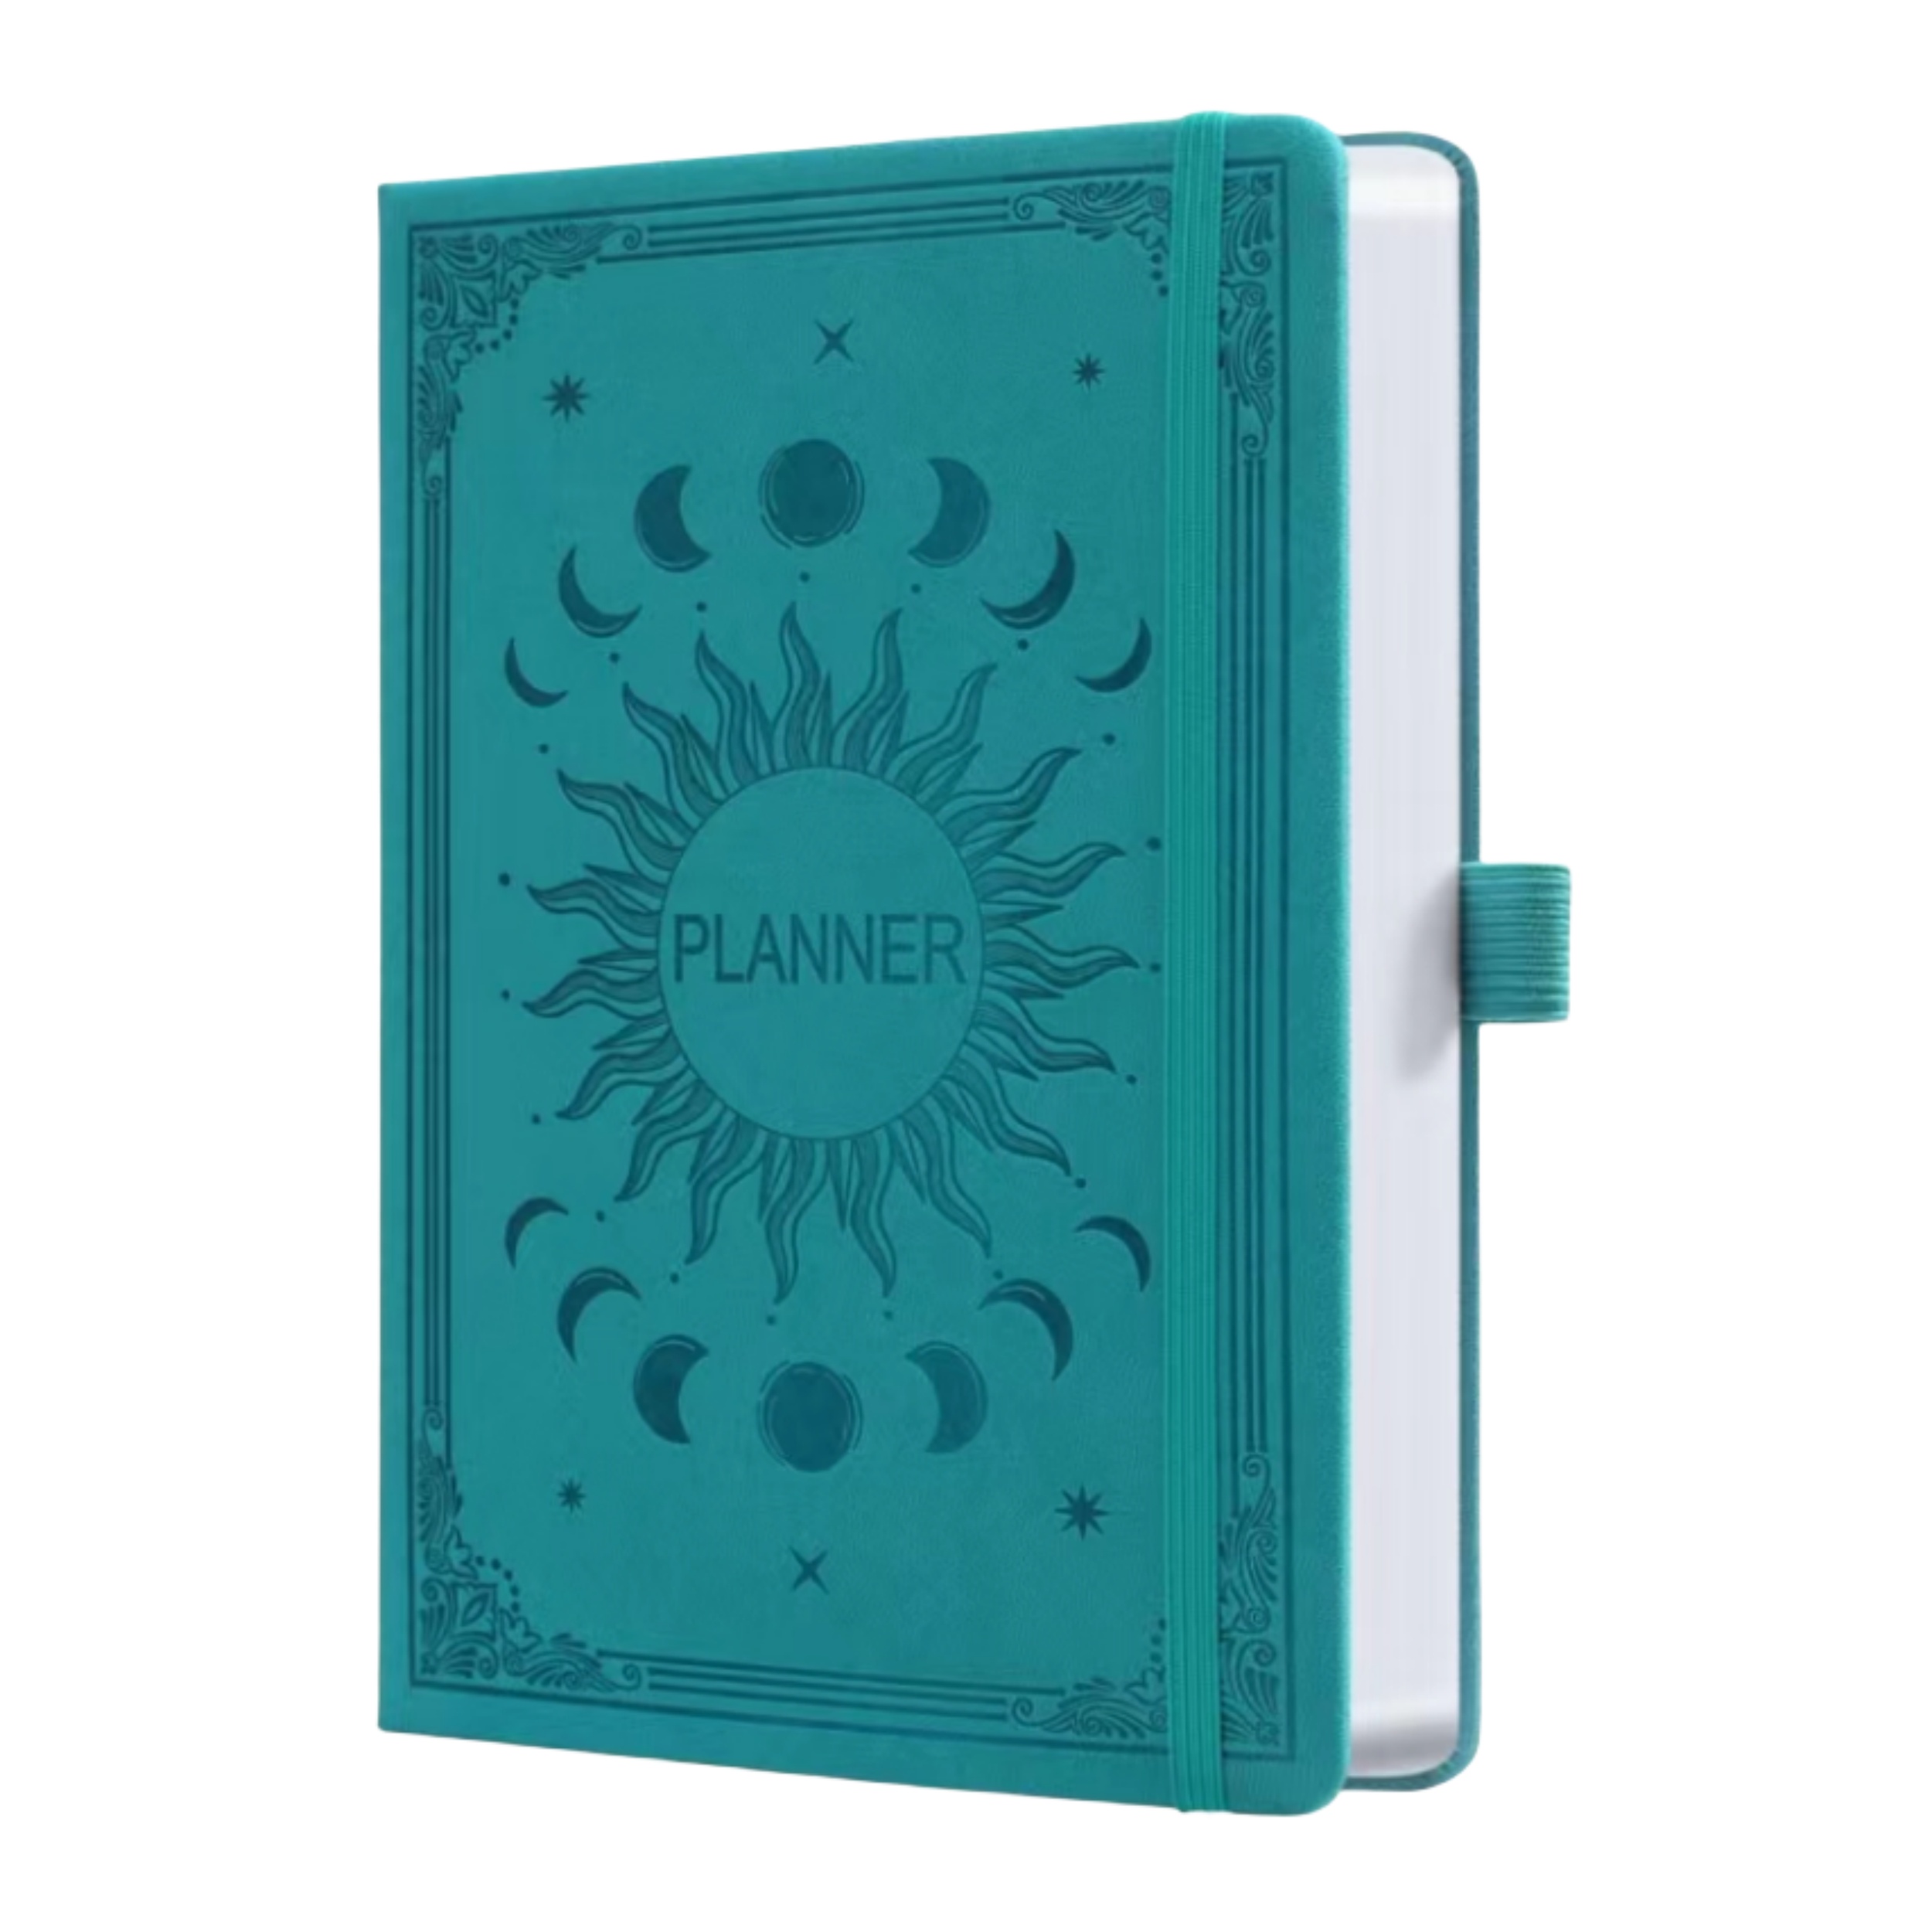 Deluxe Weekly & Monthly Life Planner to Increase Productivity and